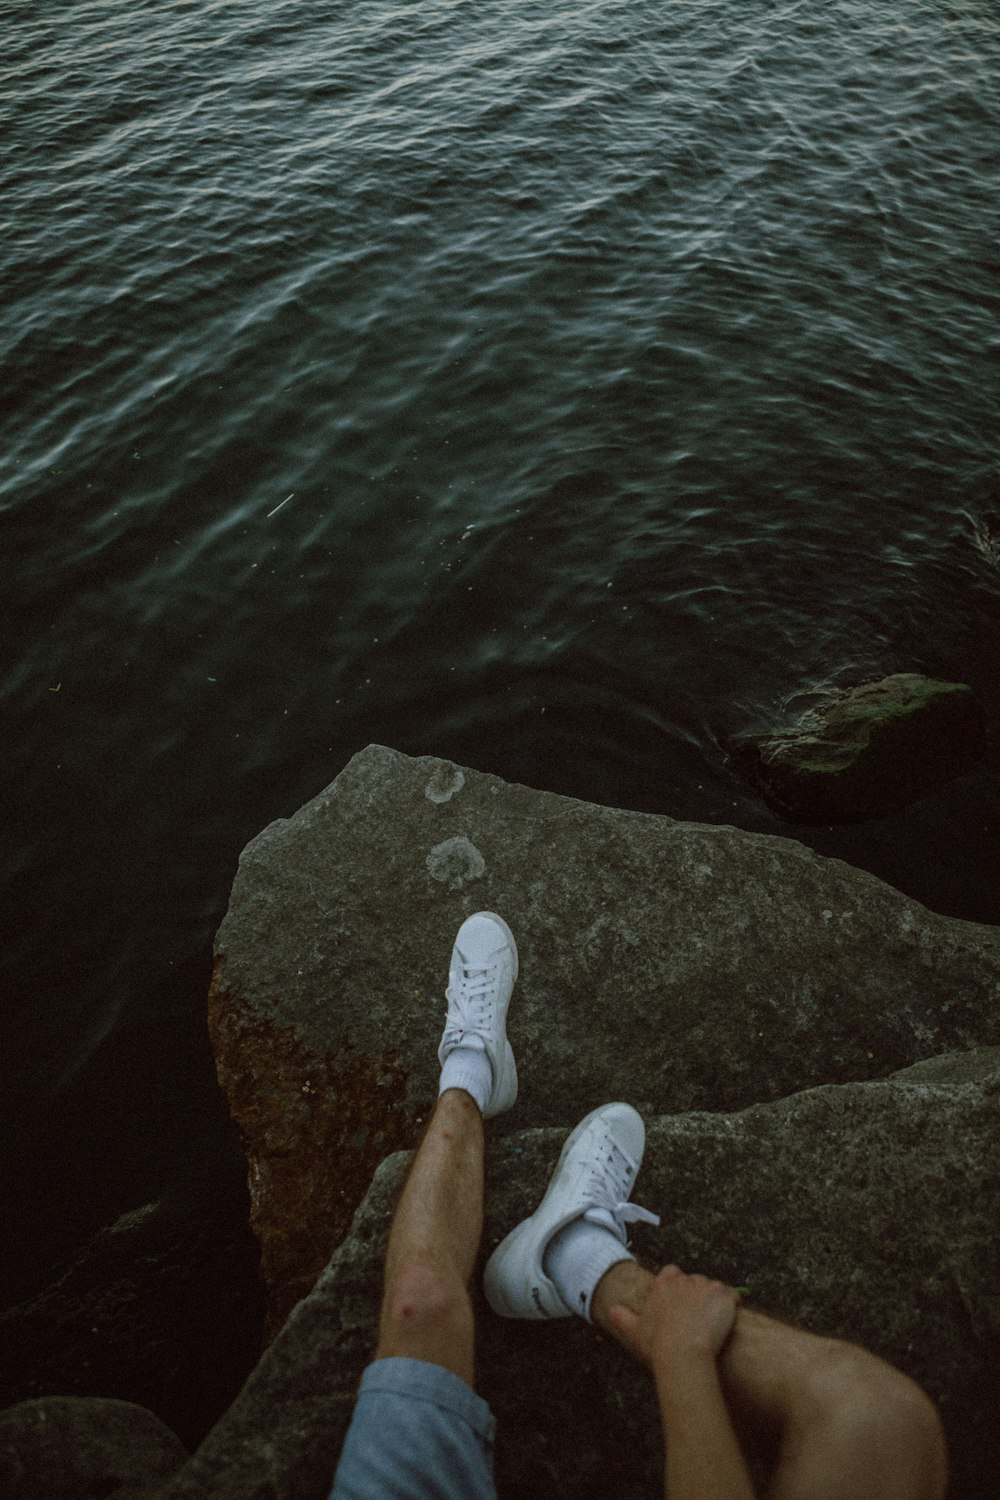 person in white shoes sitting on rock near body of water during daytime